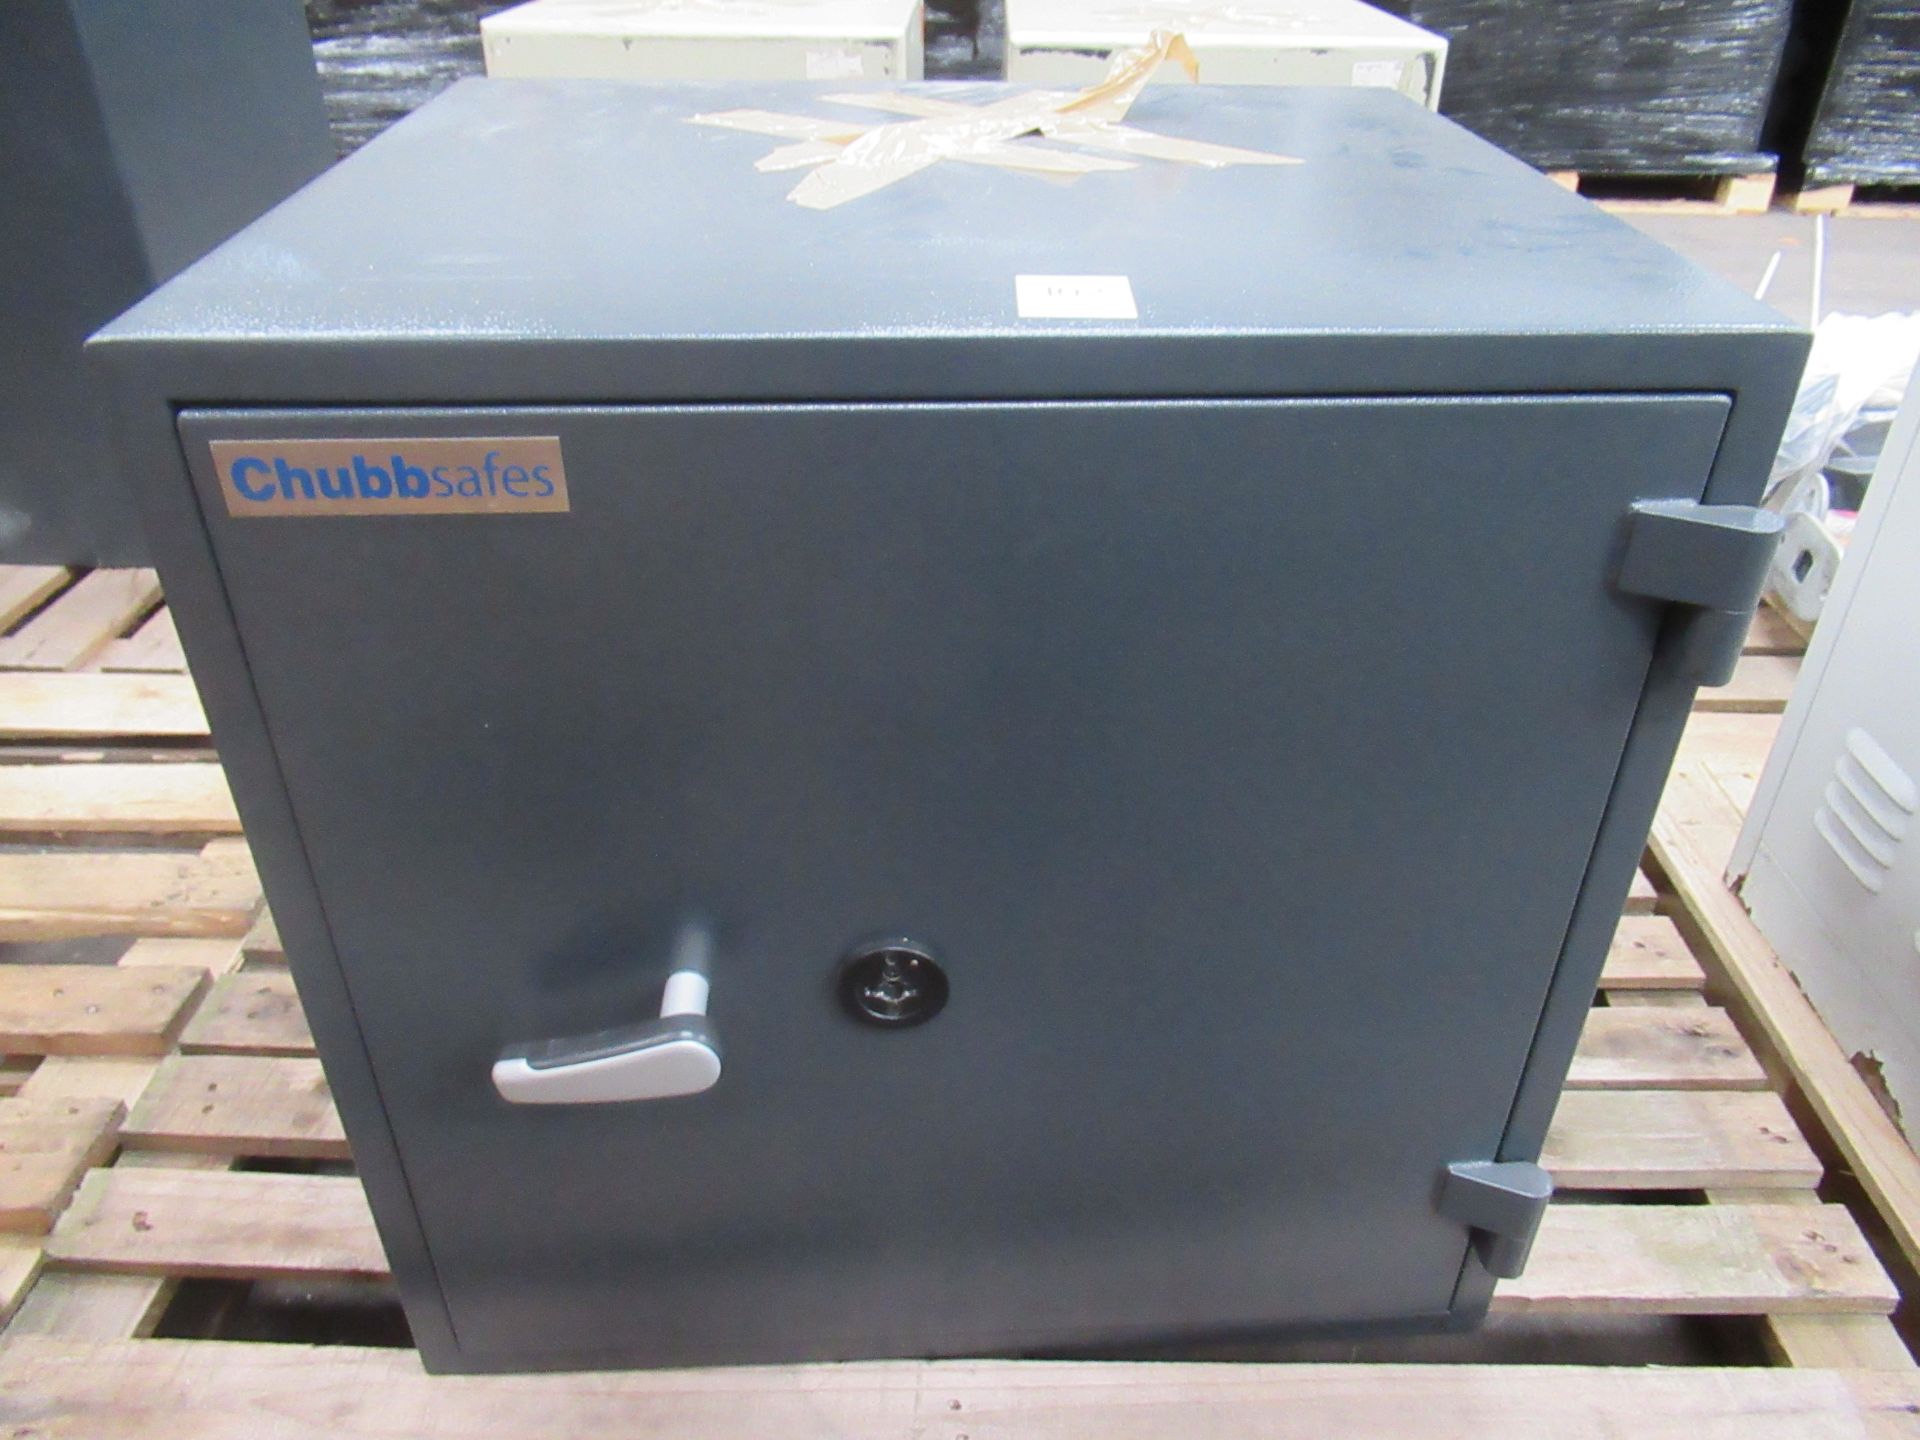 Chubbsafe safe with key- 650 x 550 x 670mm.